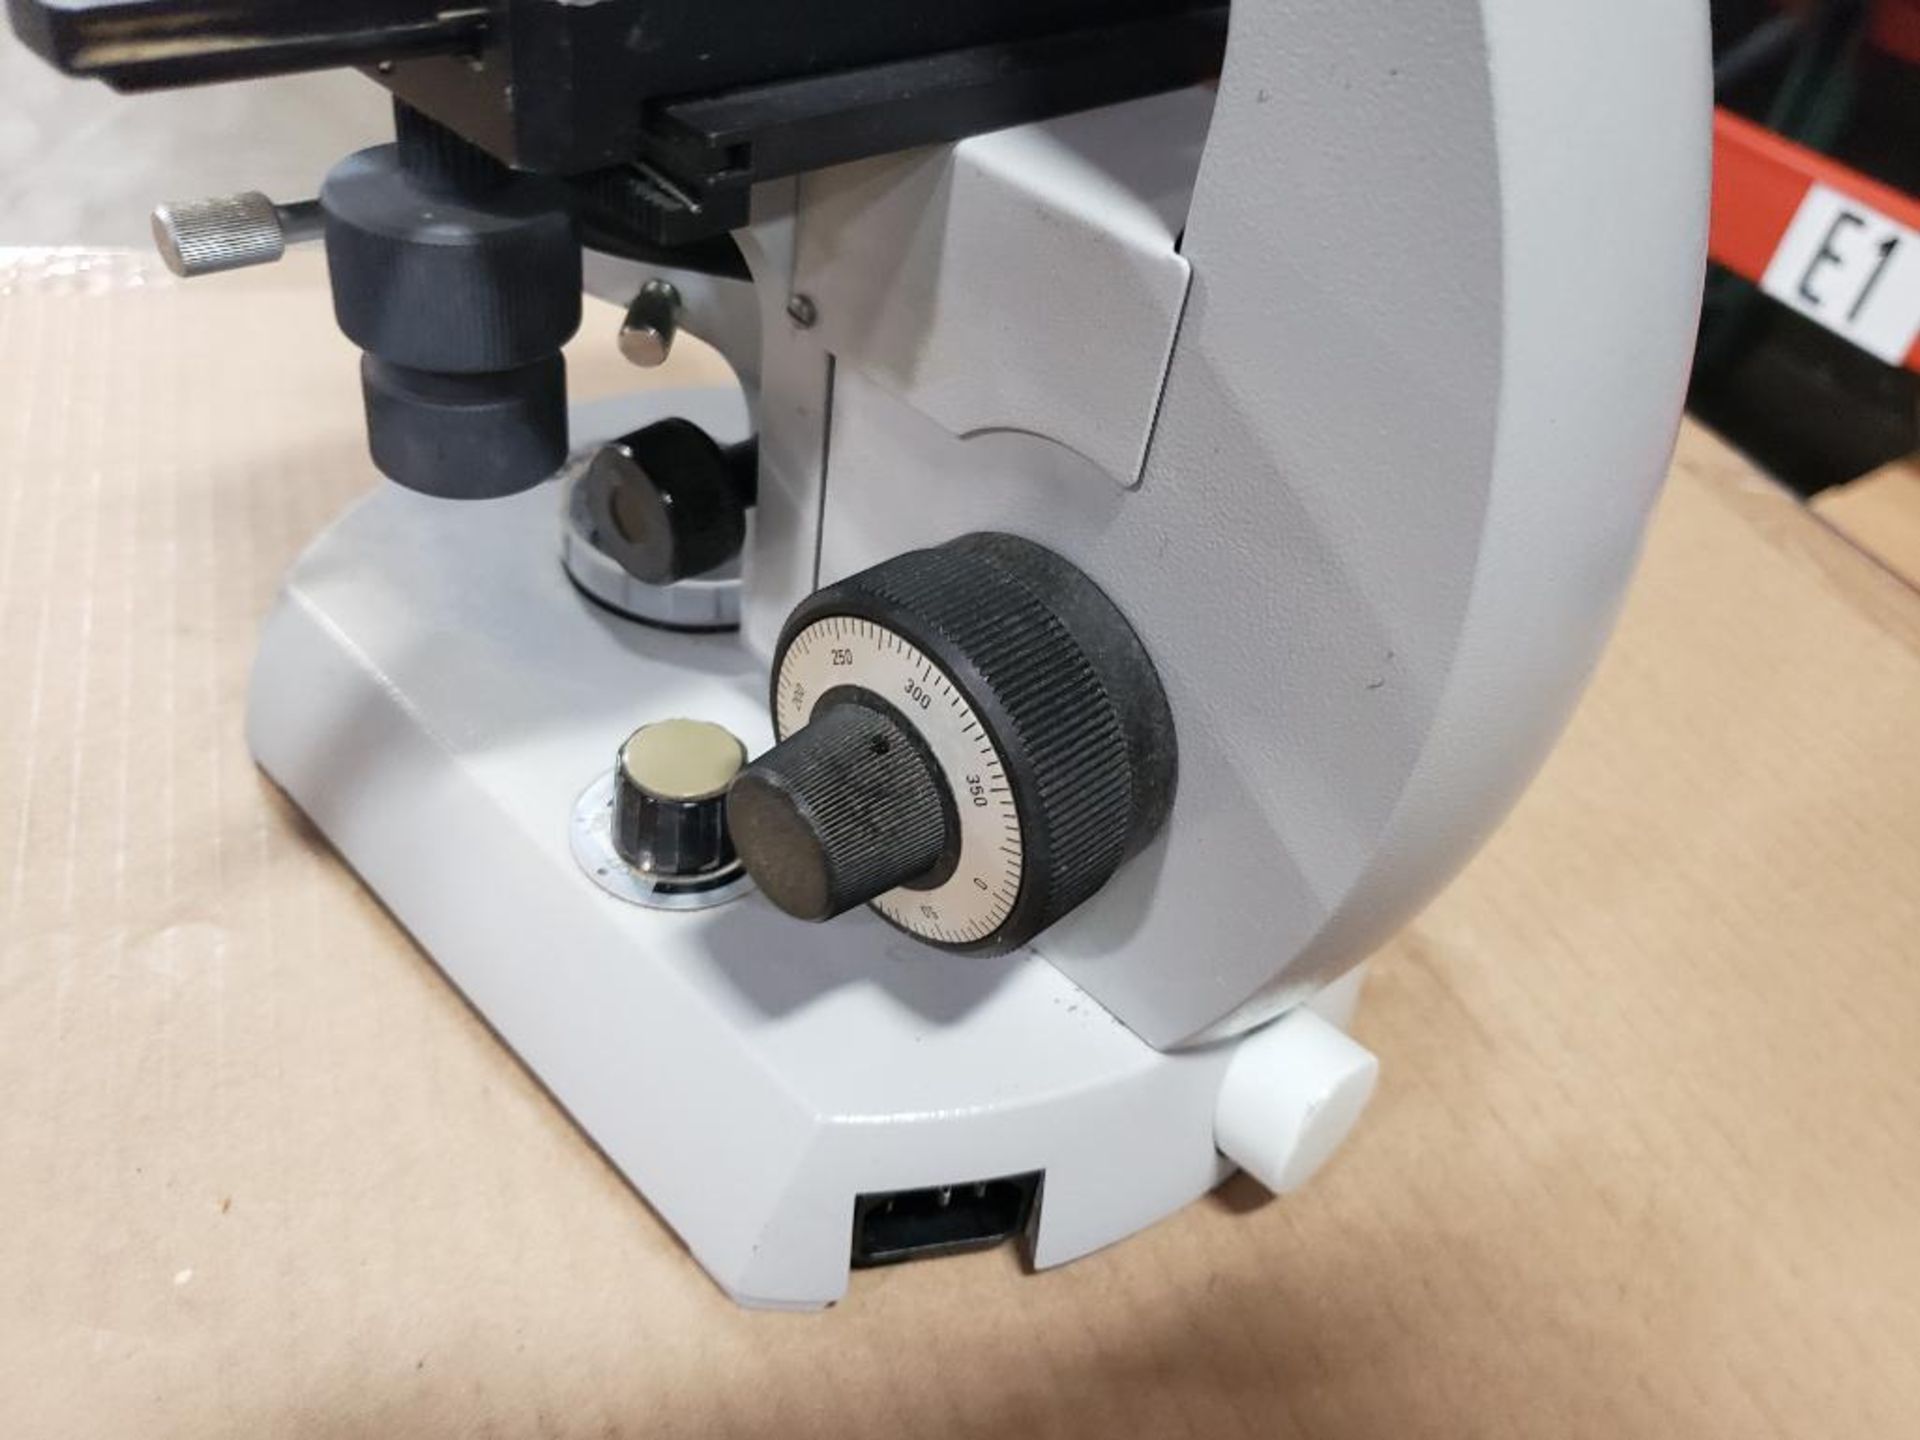 Zeiss 467065-9914 microscope. - Image 7 of 9